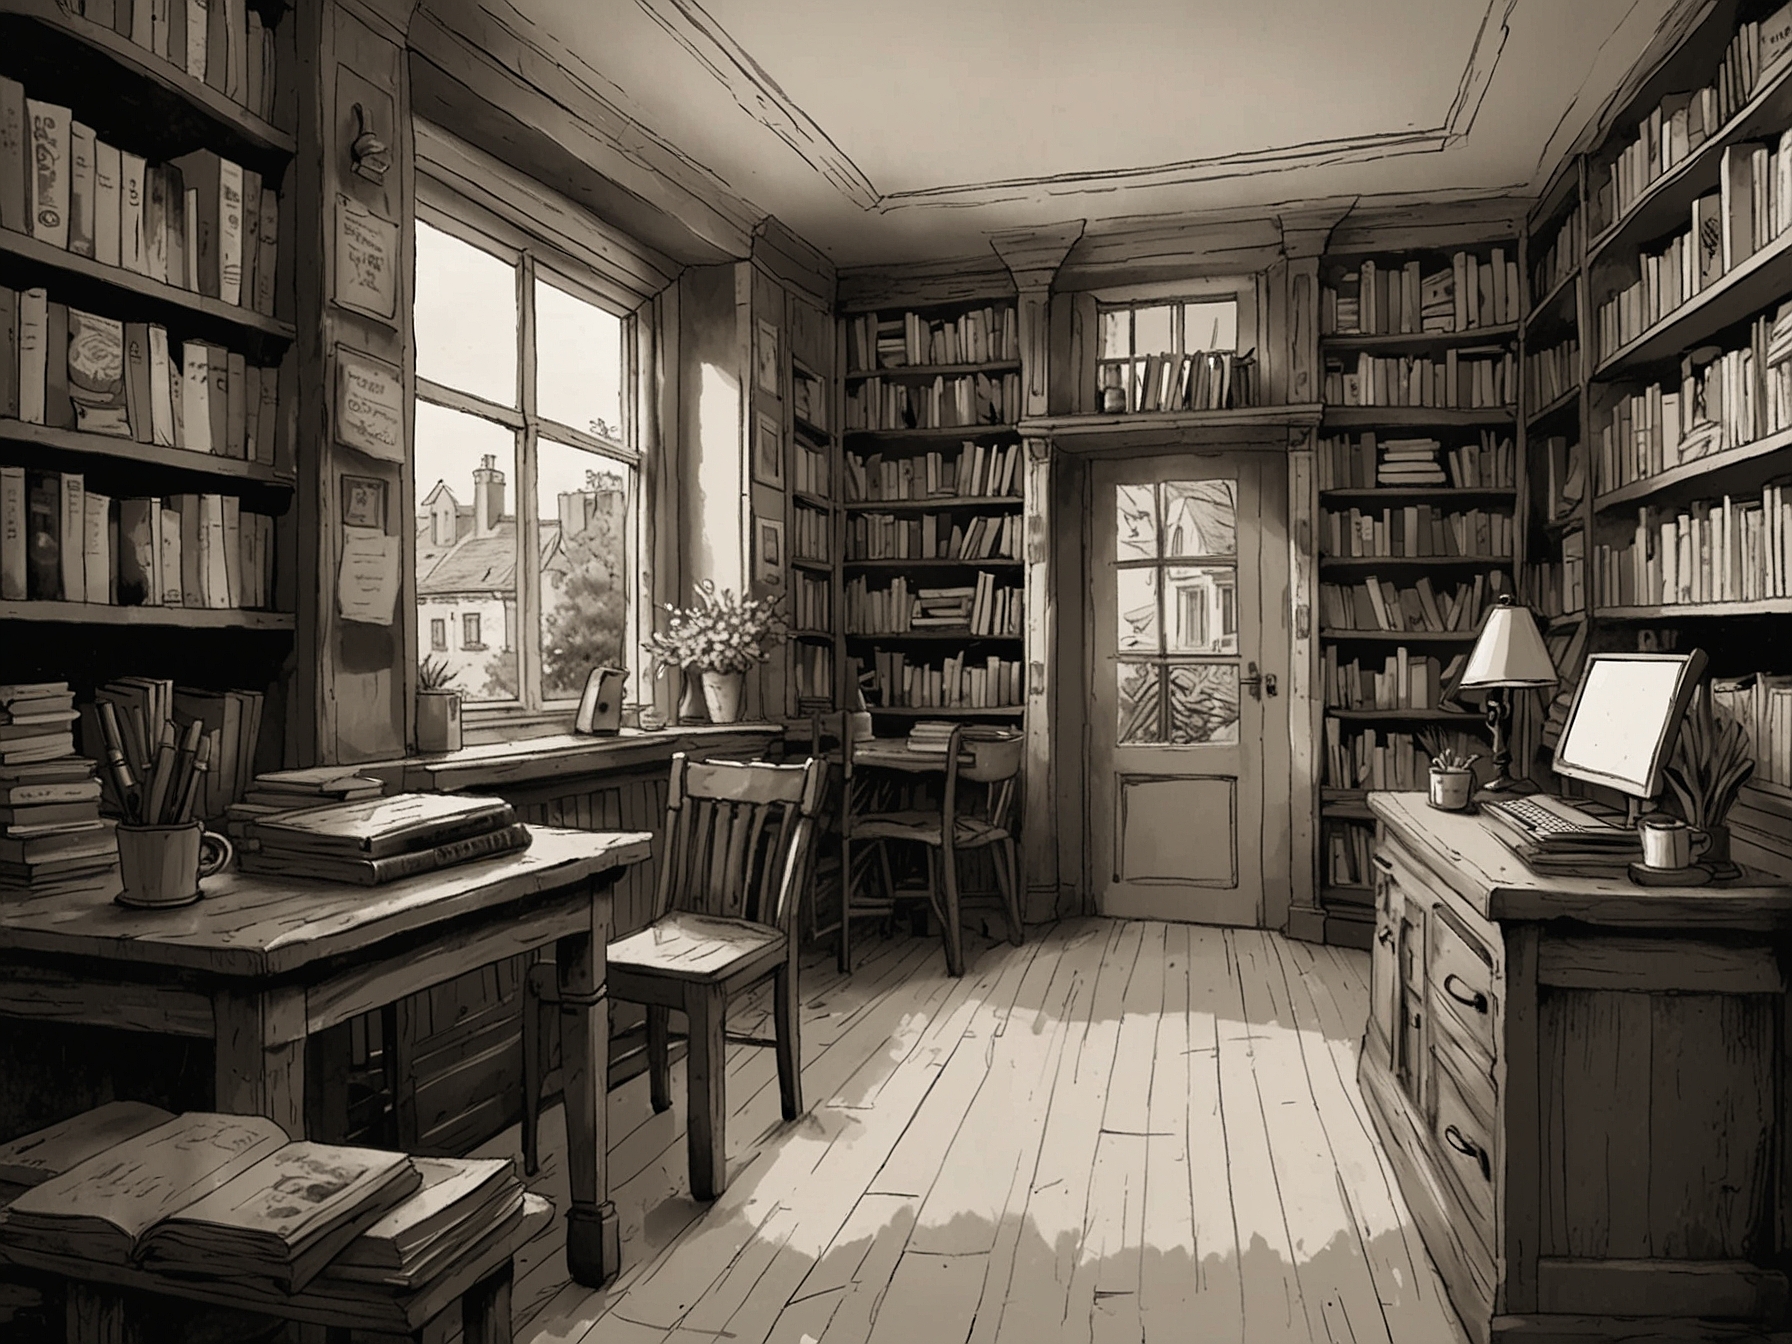 A cozy virtual bookstore with charming visuals and inviting ambiance, reflecting the quaint and serene environment of a small town bookshop.